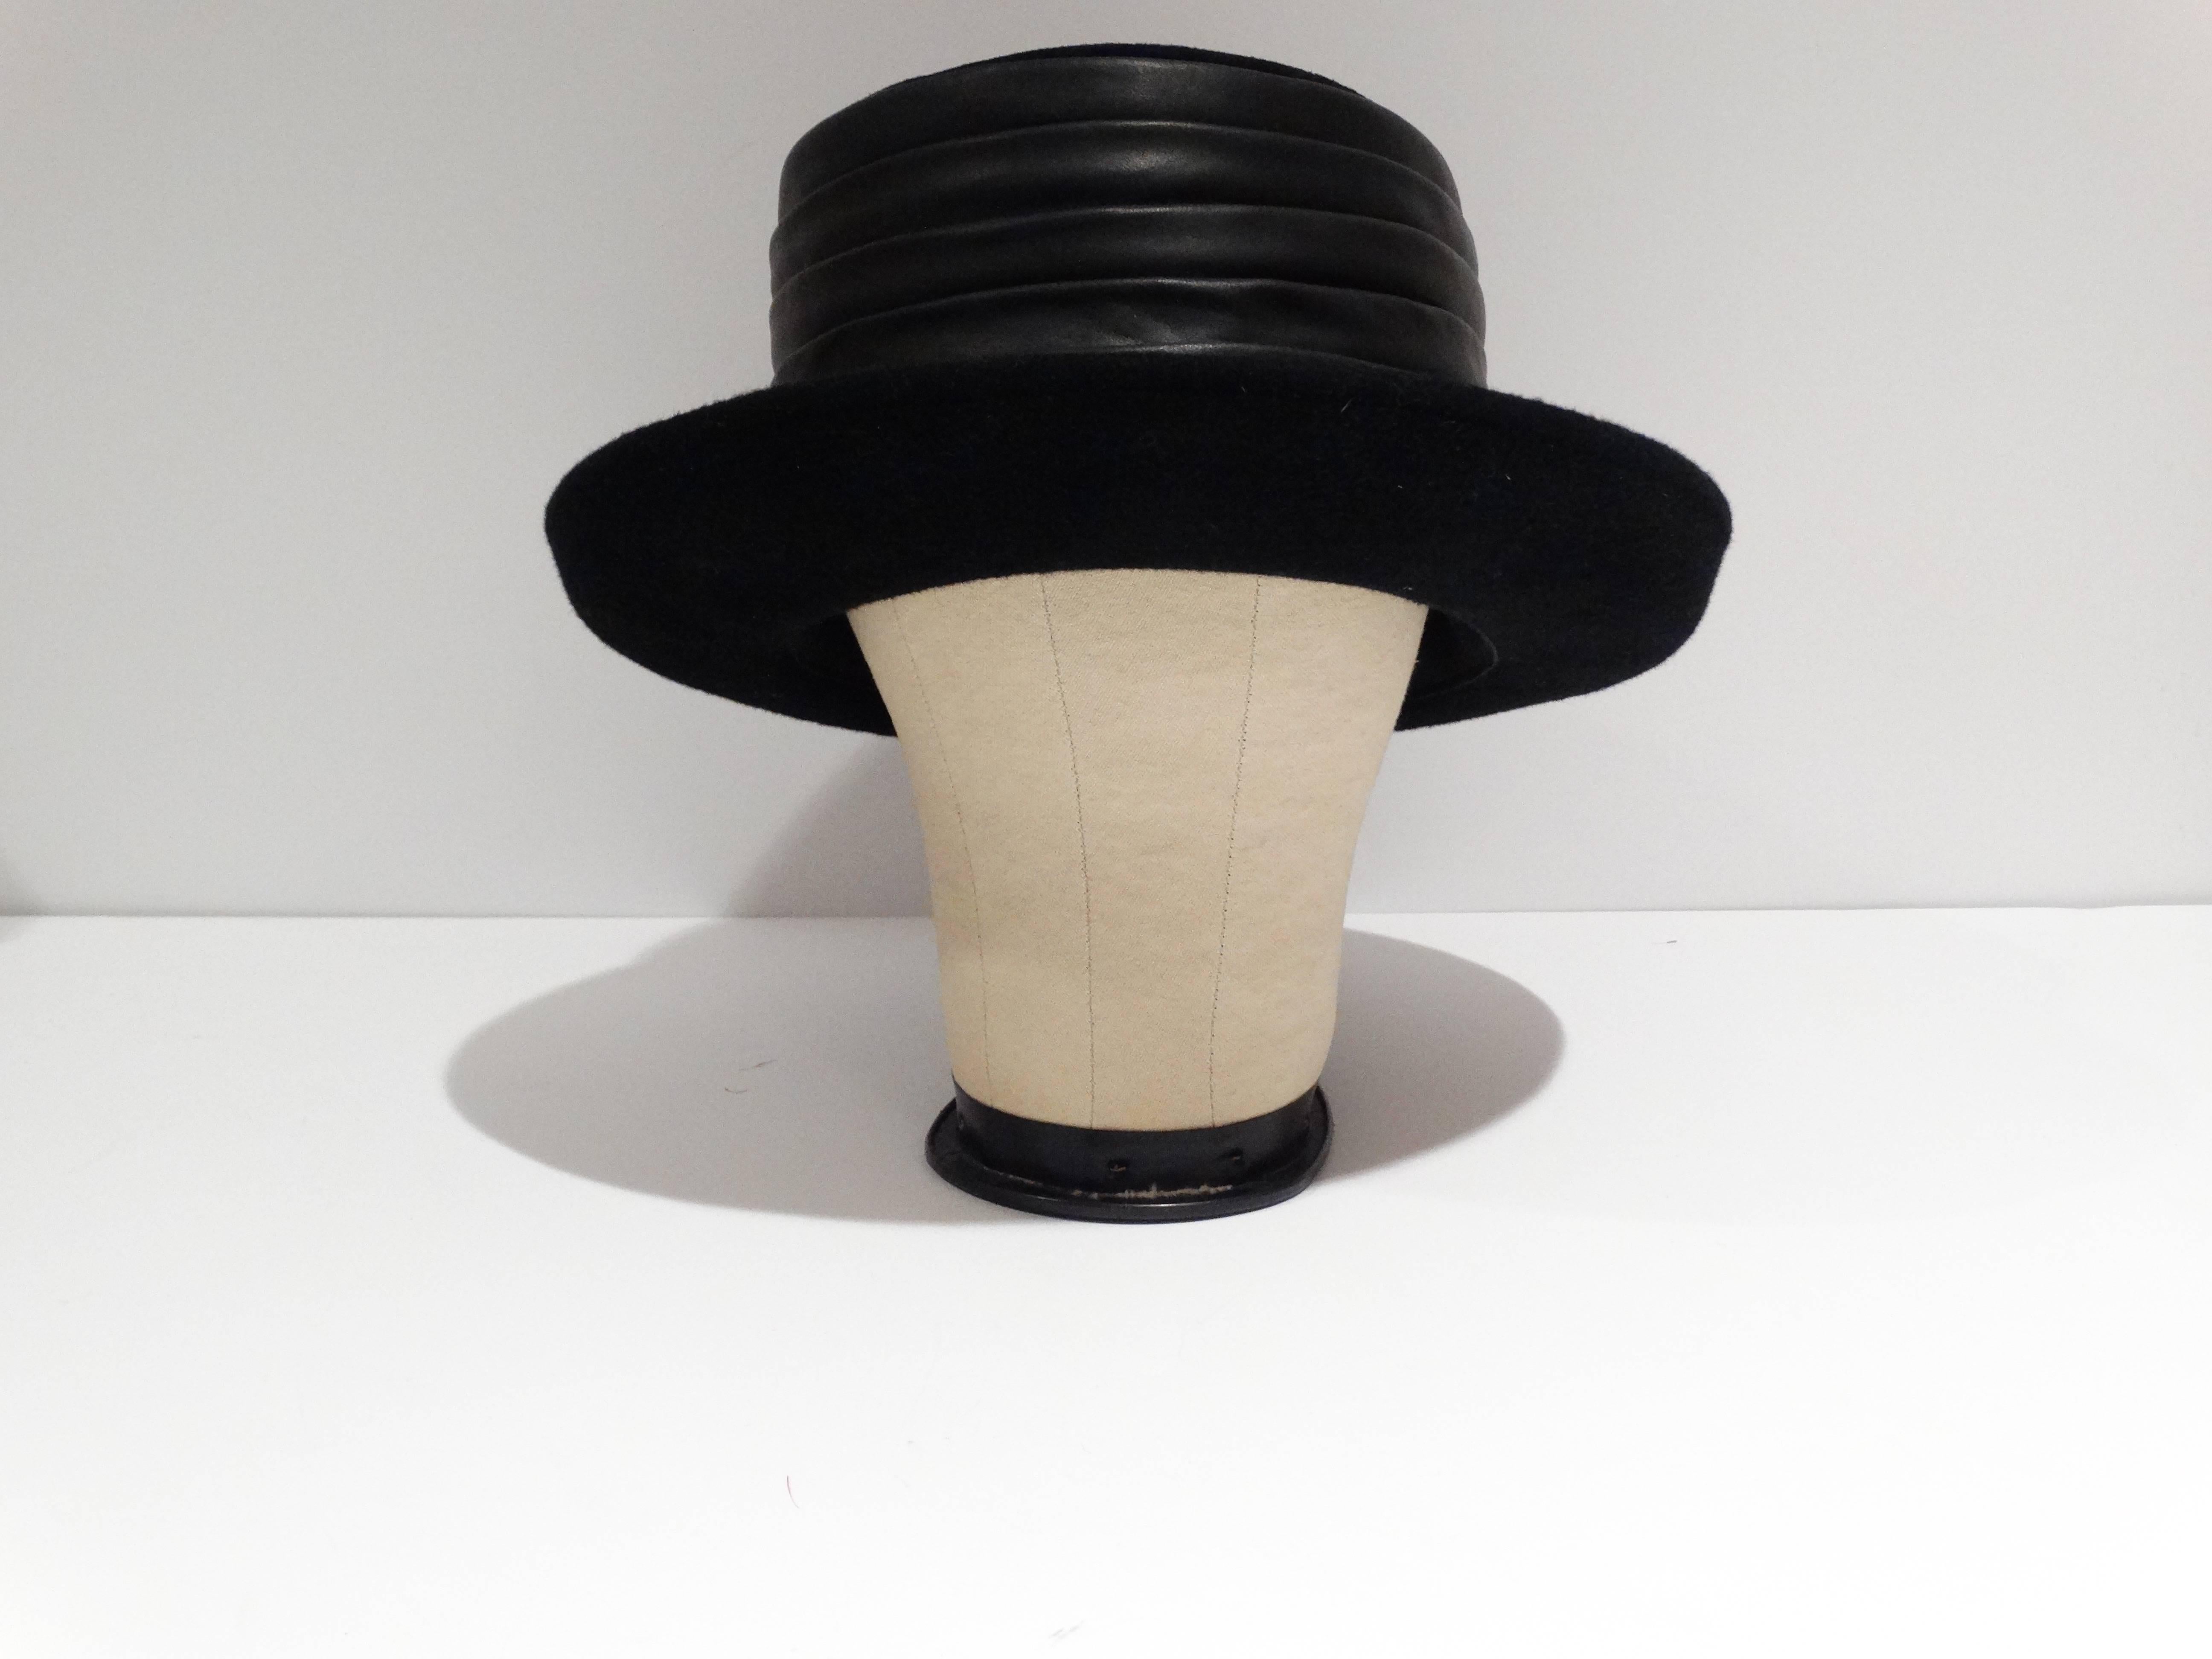 A twist on the top hat, this 1980's Kokin black leather and suede top hat is a show stopper. Unworn with tags still attached purchased from Saks Fifth Avenue. Measures 6 1/2